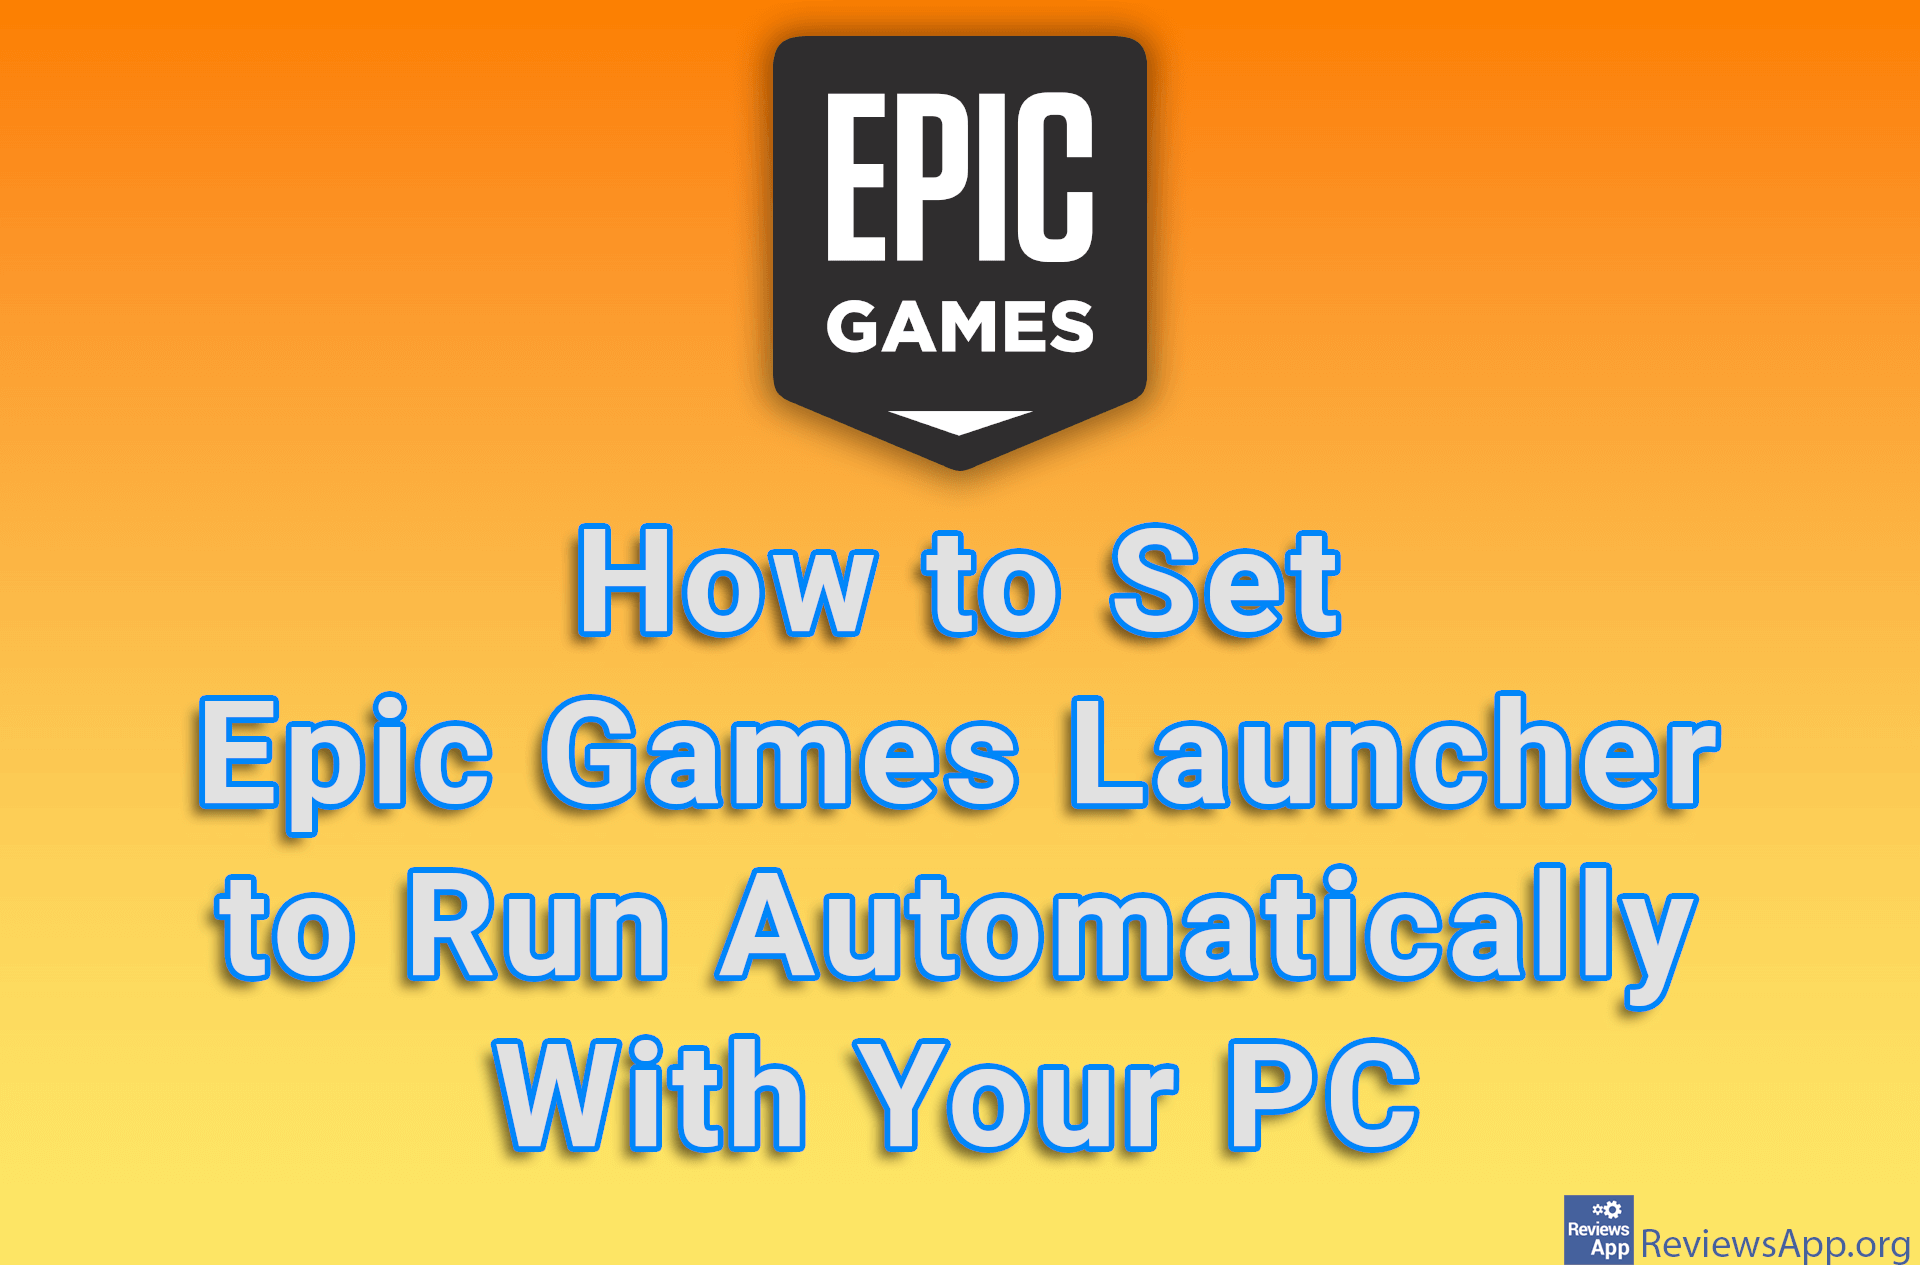 How to Set Epic Games Launcher to Run Automatically With Your PC